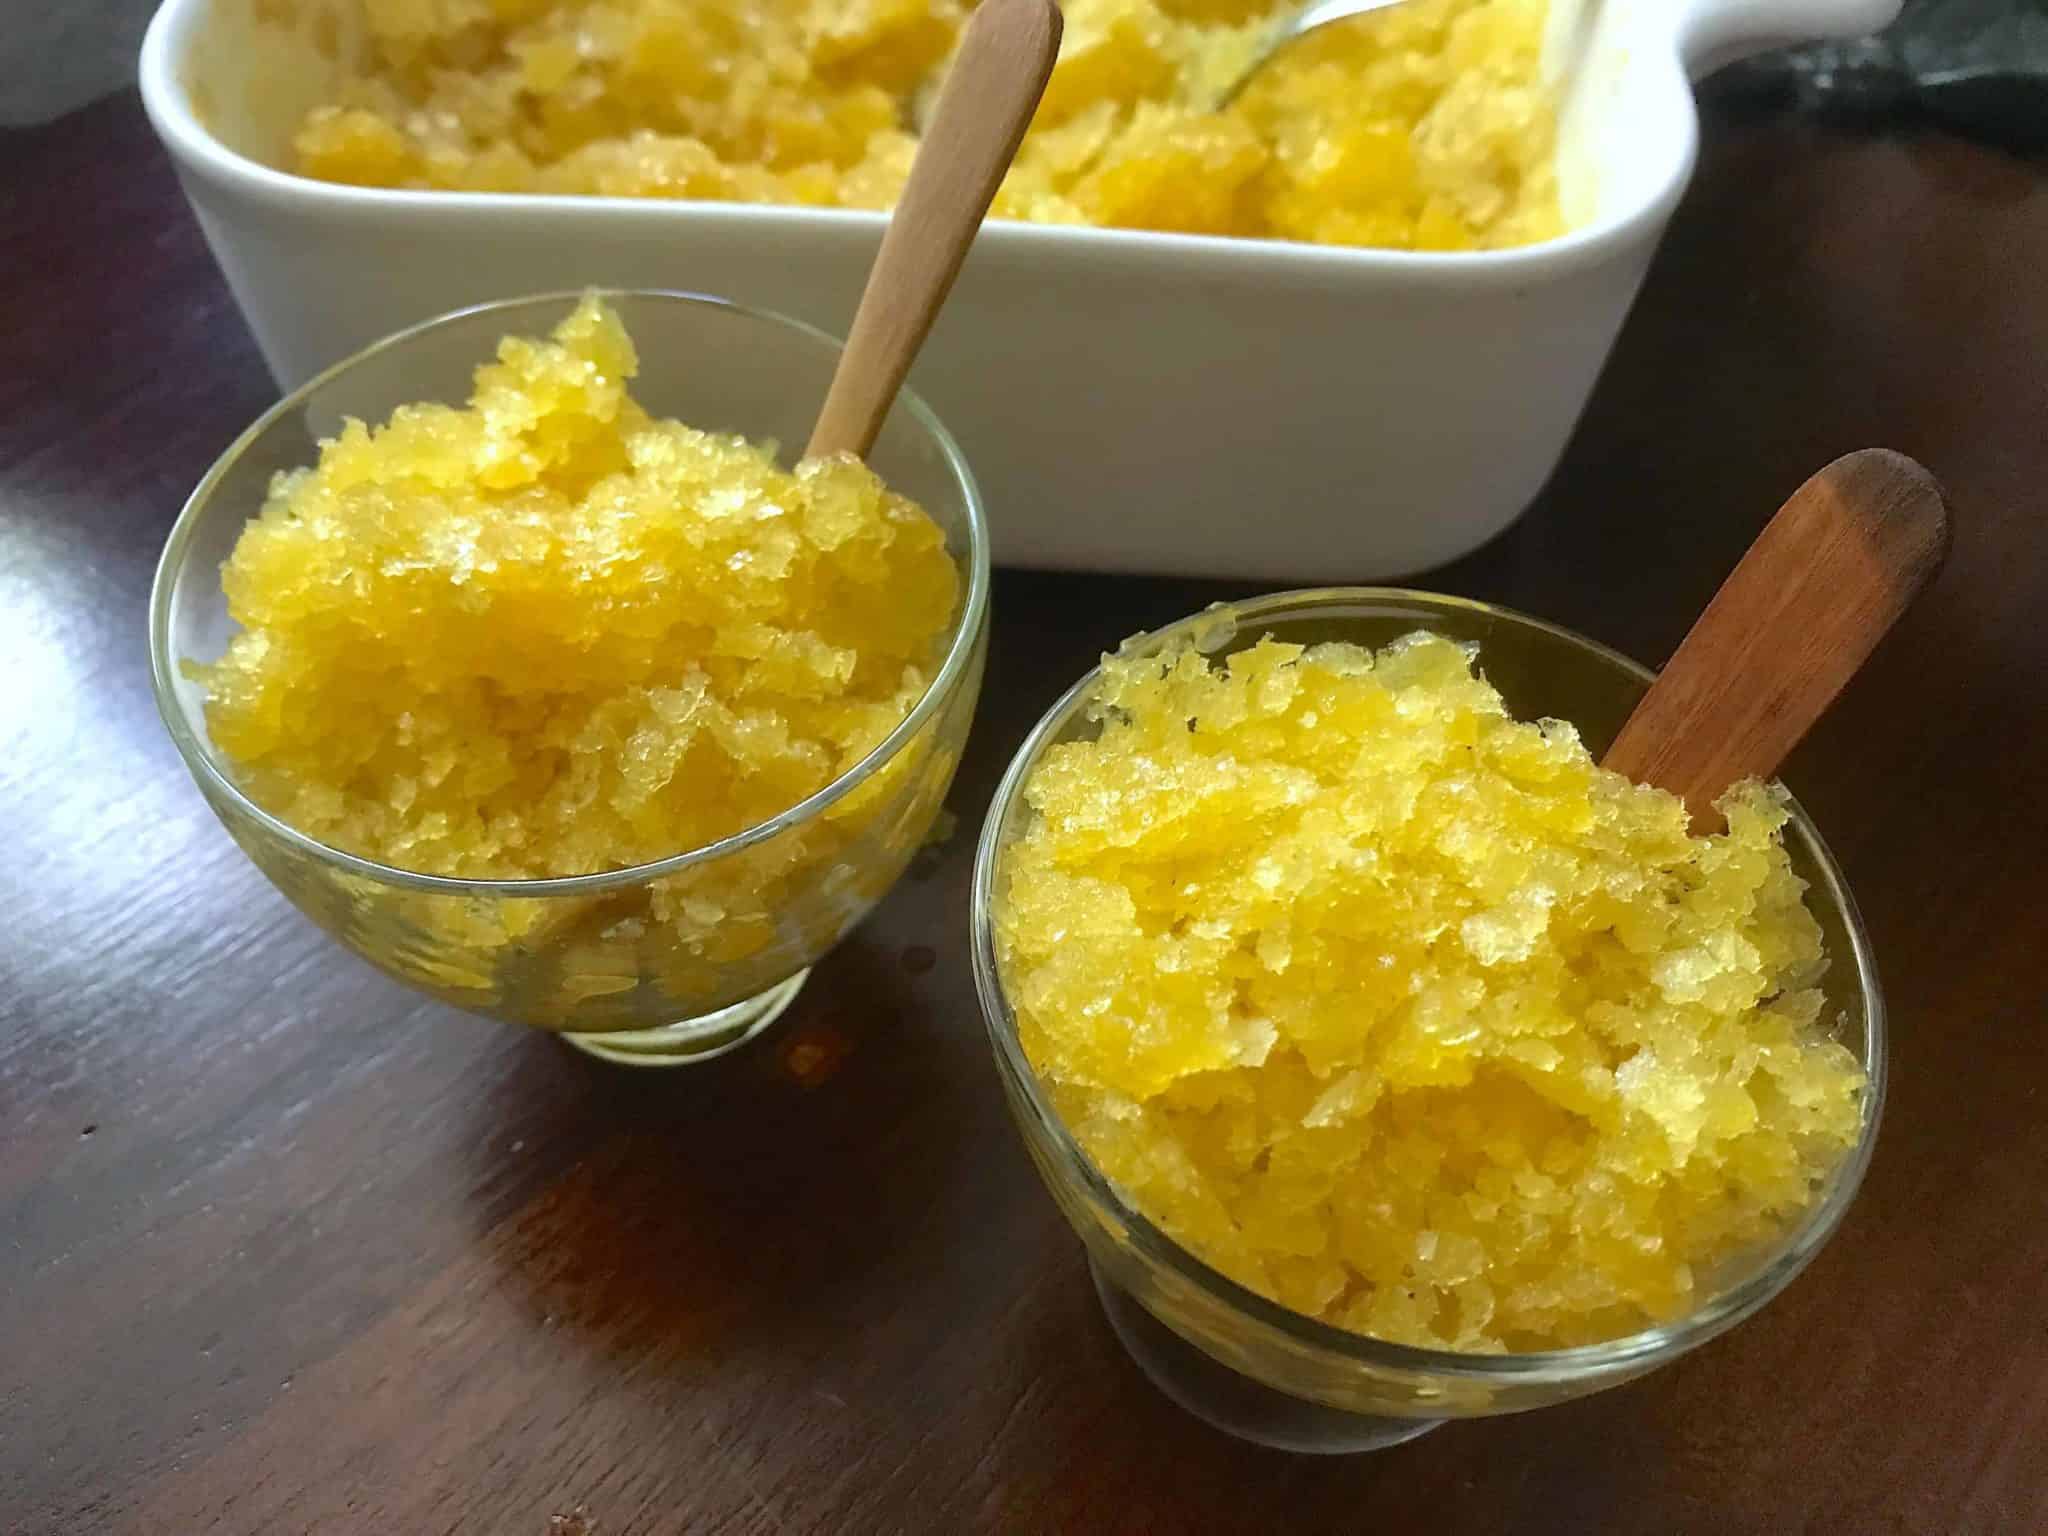 This passion fruit granita (or Italian ice) recipe is not only super refreshing, it is so yummy! Easily make it at home following 4 simple steps.